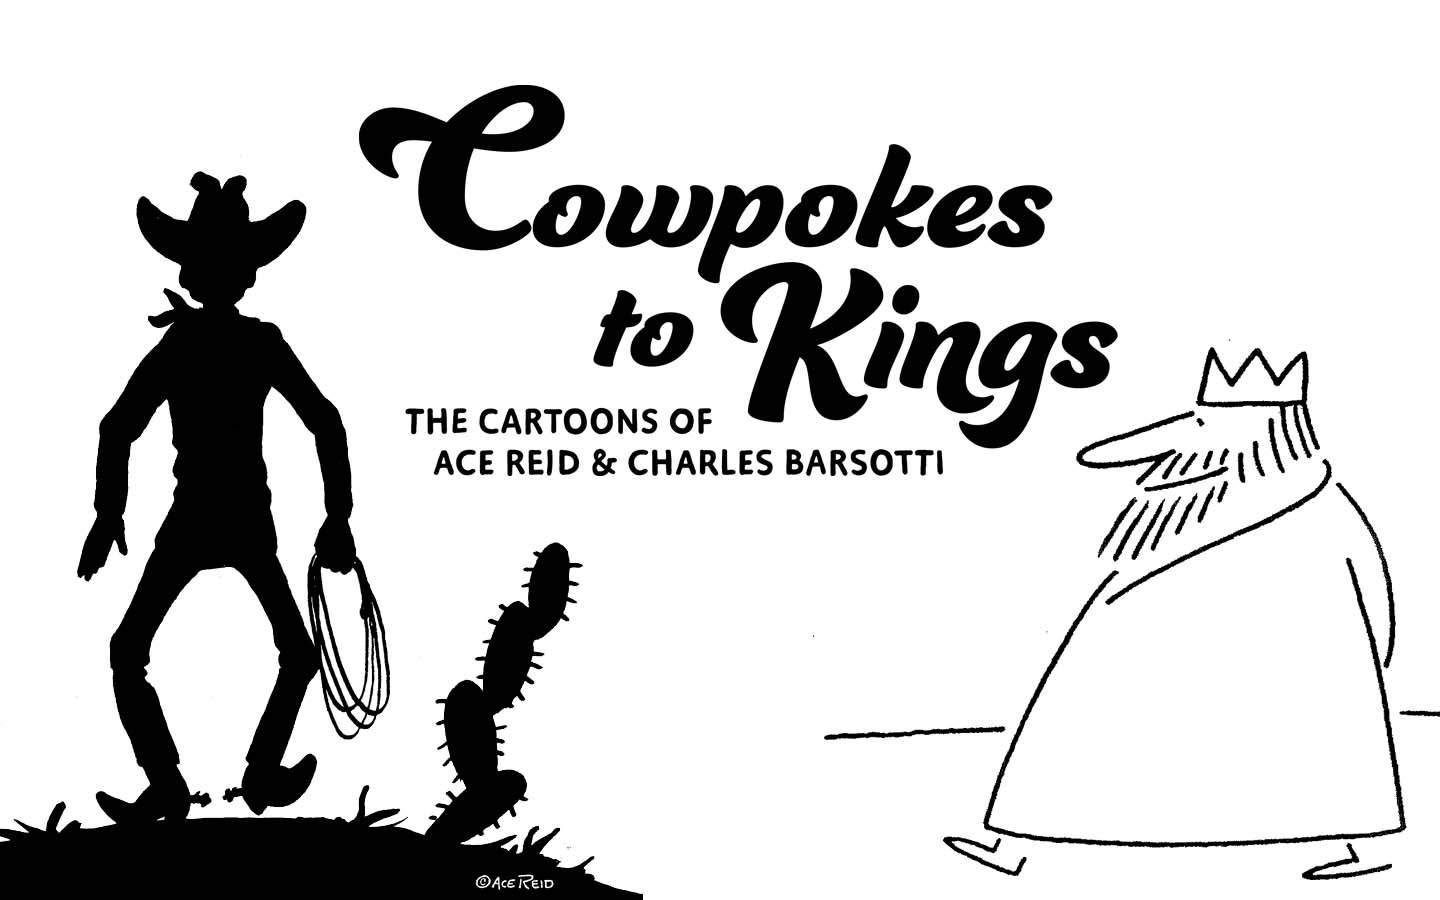 Logo for Cowpokes to Kings exhibition